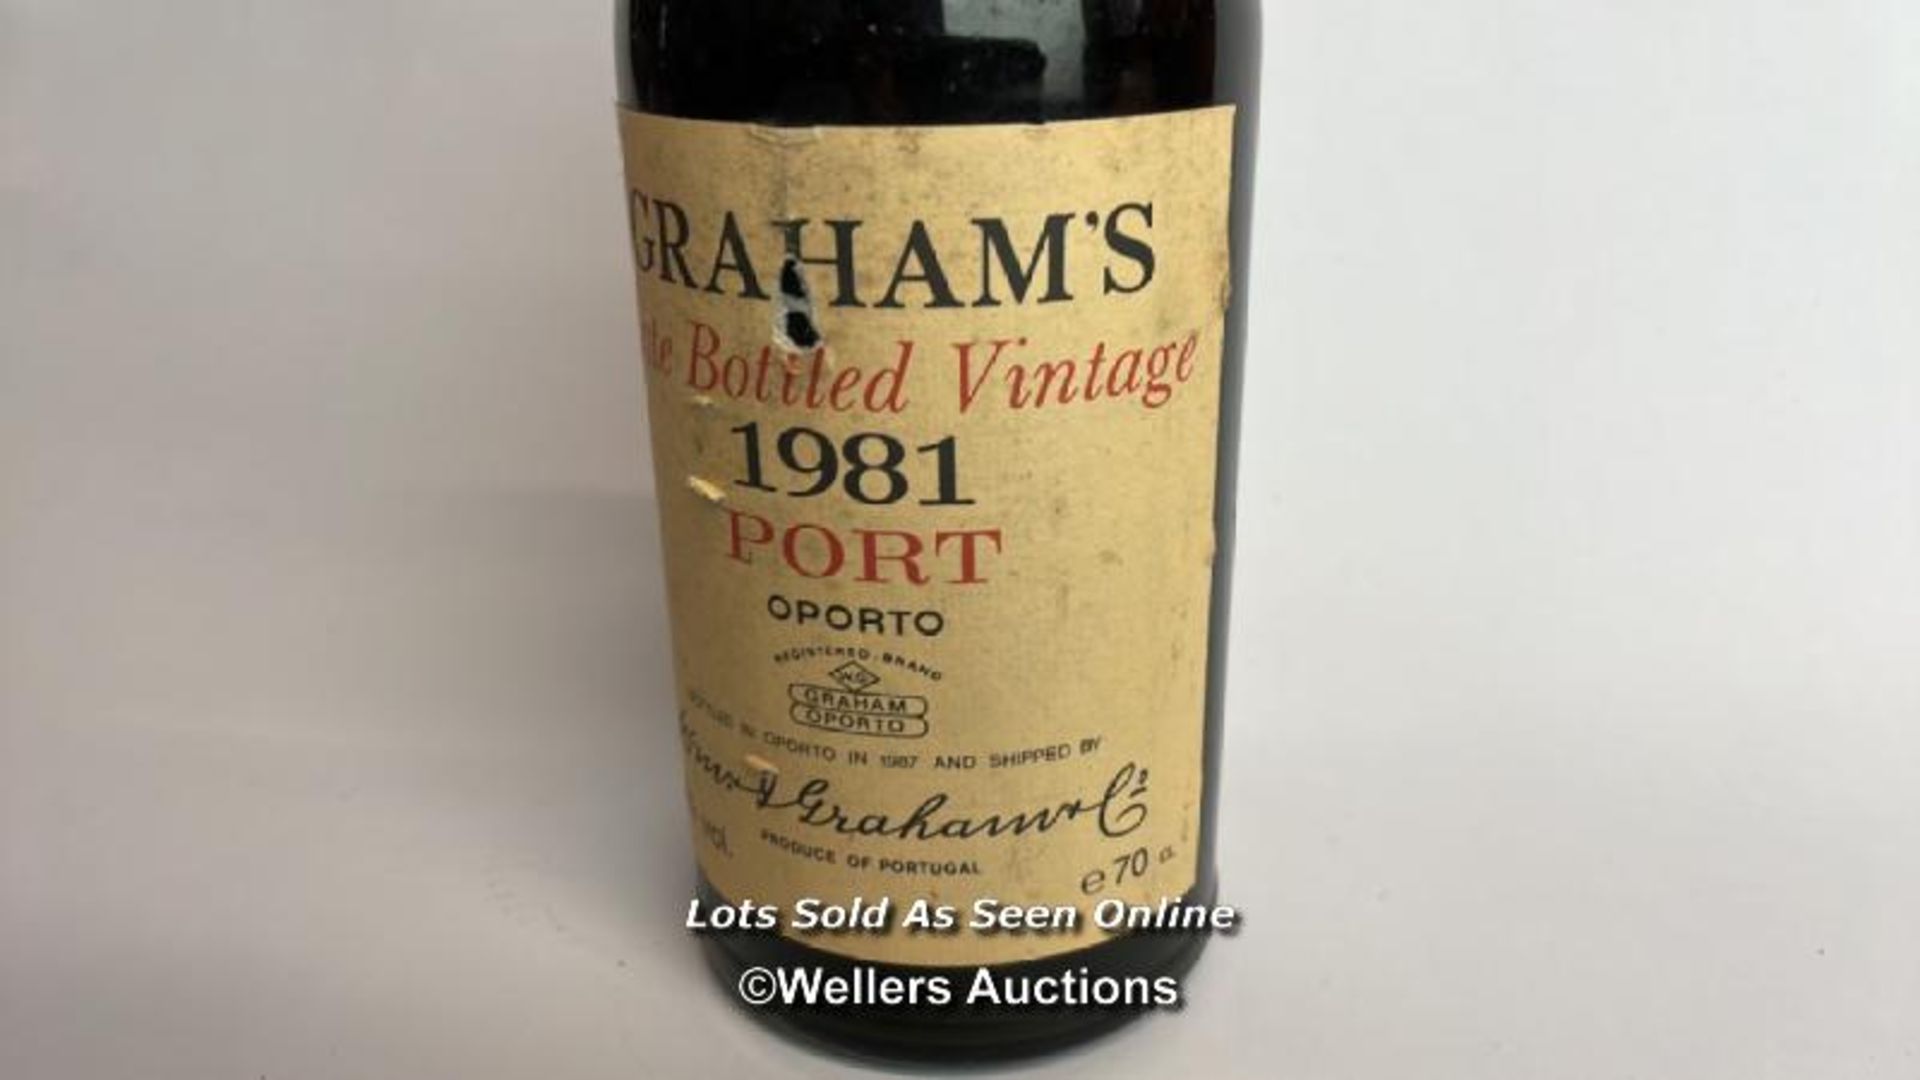 Graham's Late bottled vintage 1981 port, 70cl, 20% vol / Please see images for fill level and - Image 4 of 7